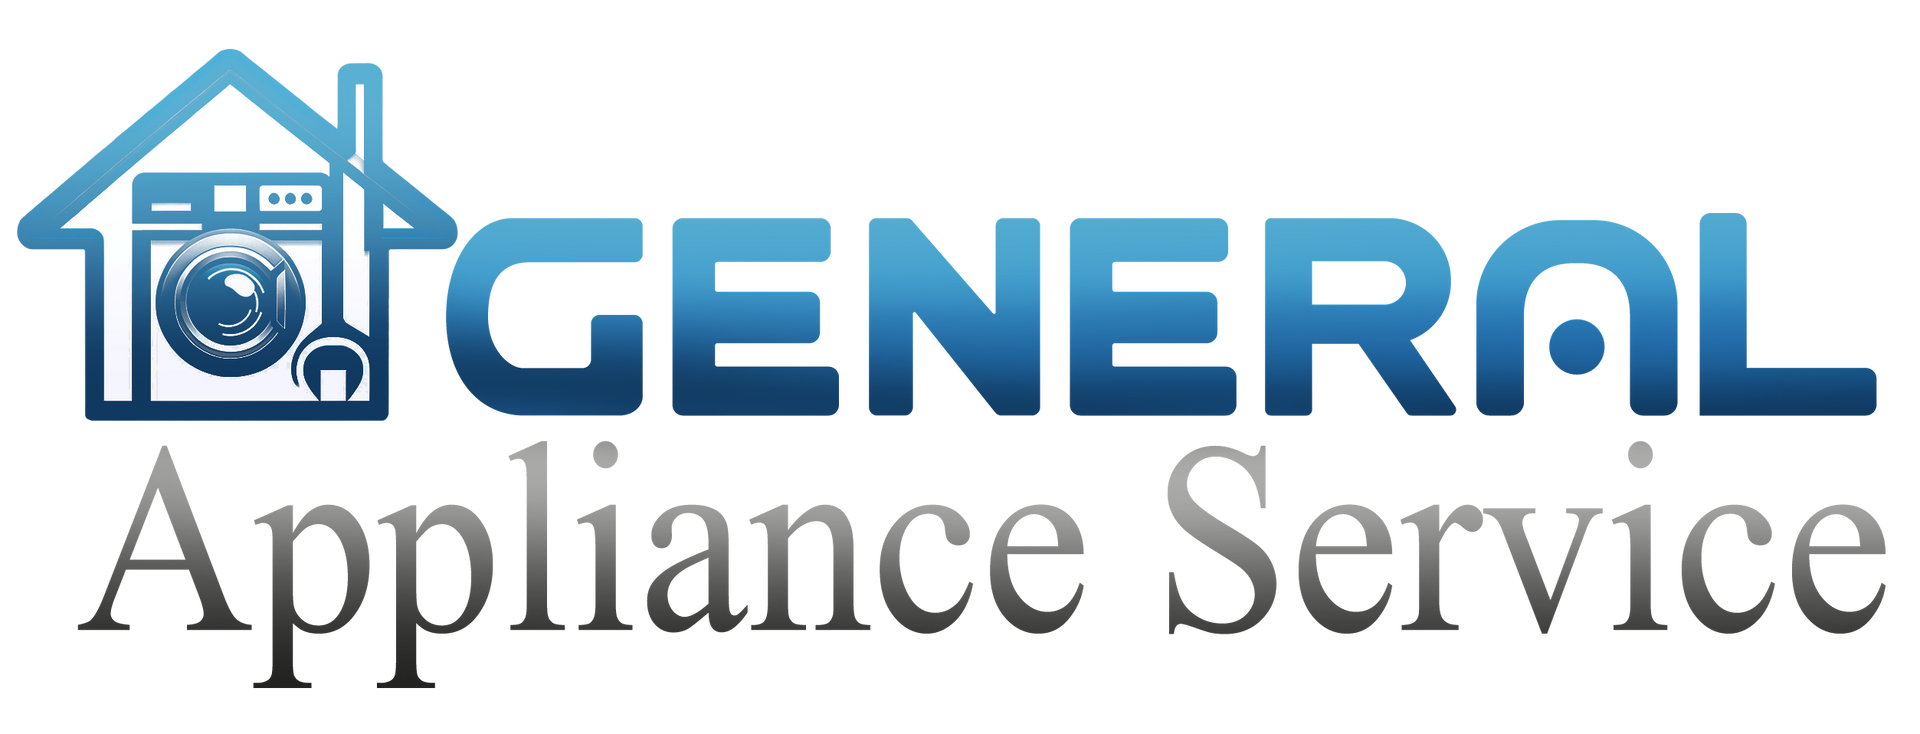 the logo for general appliance service shows a house and a washer and dryer .